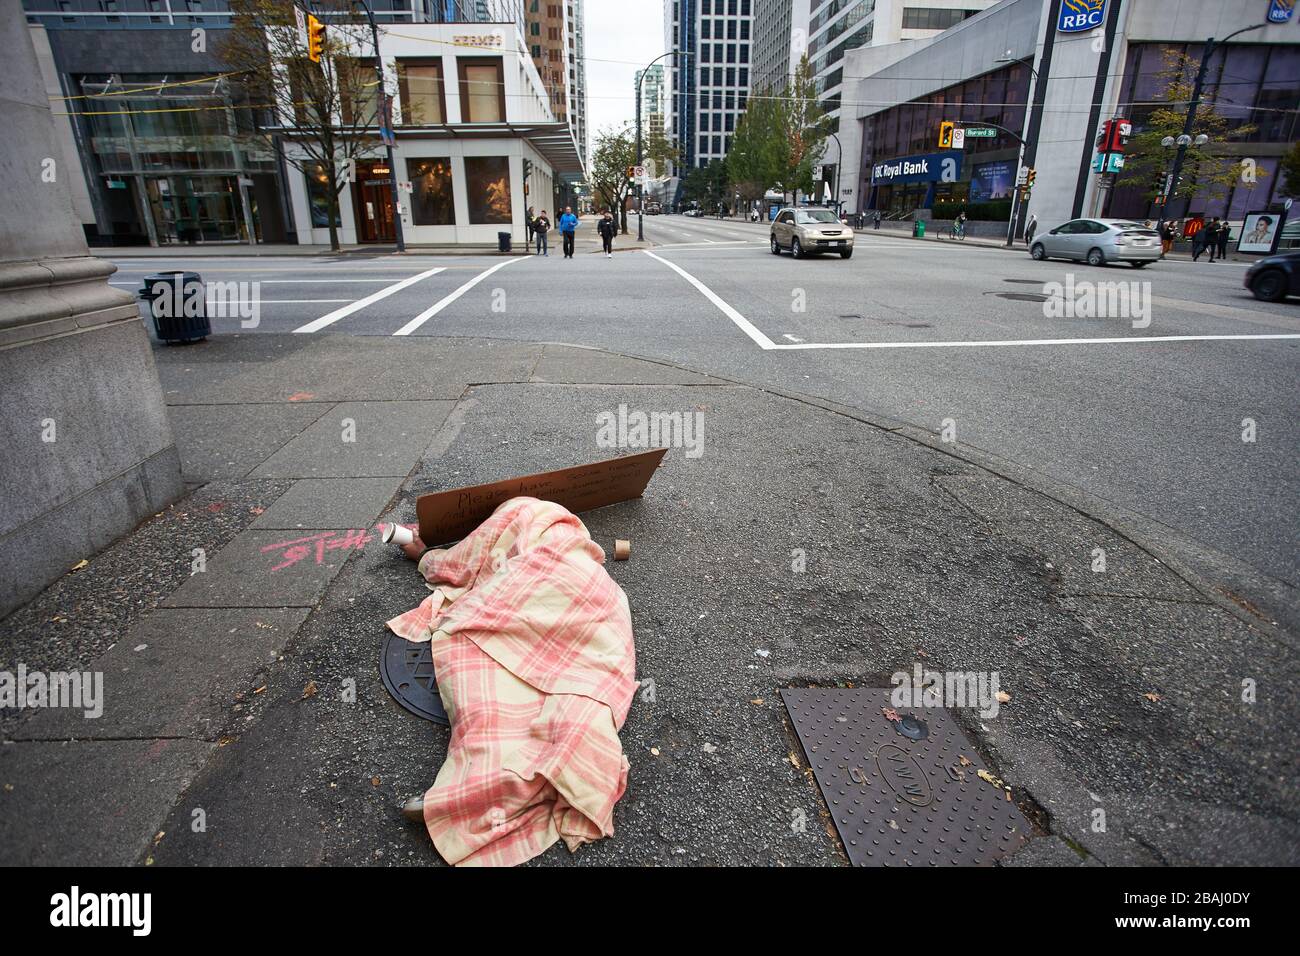 A homeless person is seen begging on the street in downtown Vancouver, Canada, on Monday, Oct 14, 2019. Stock Photo